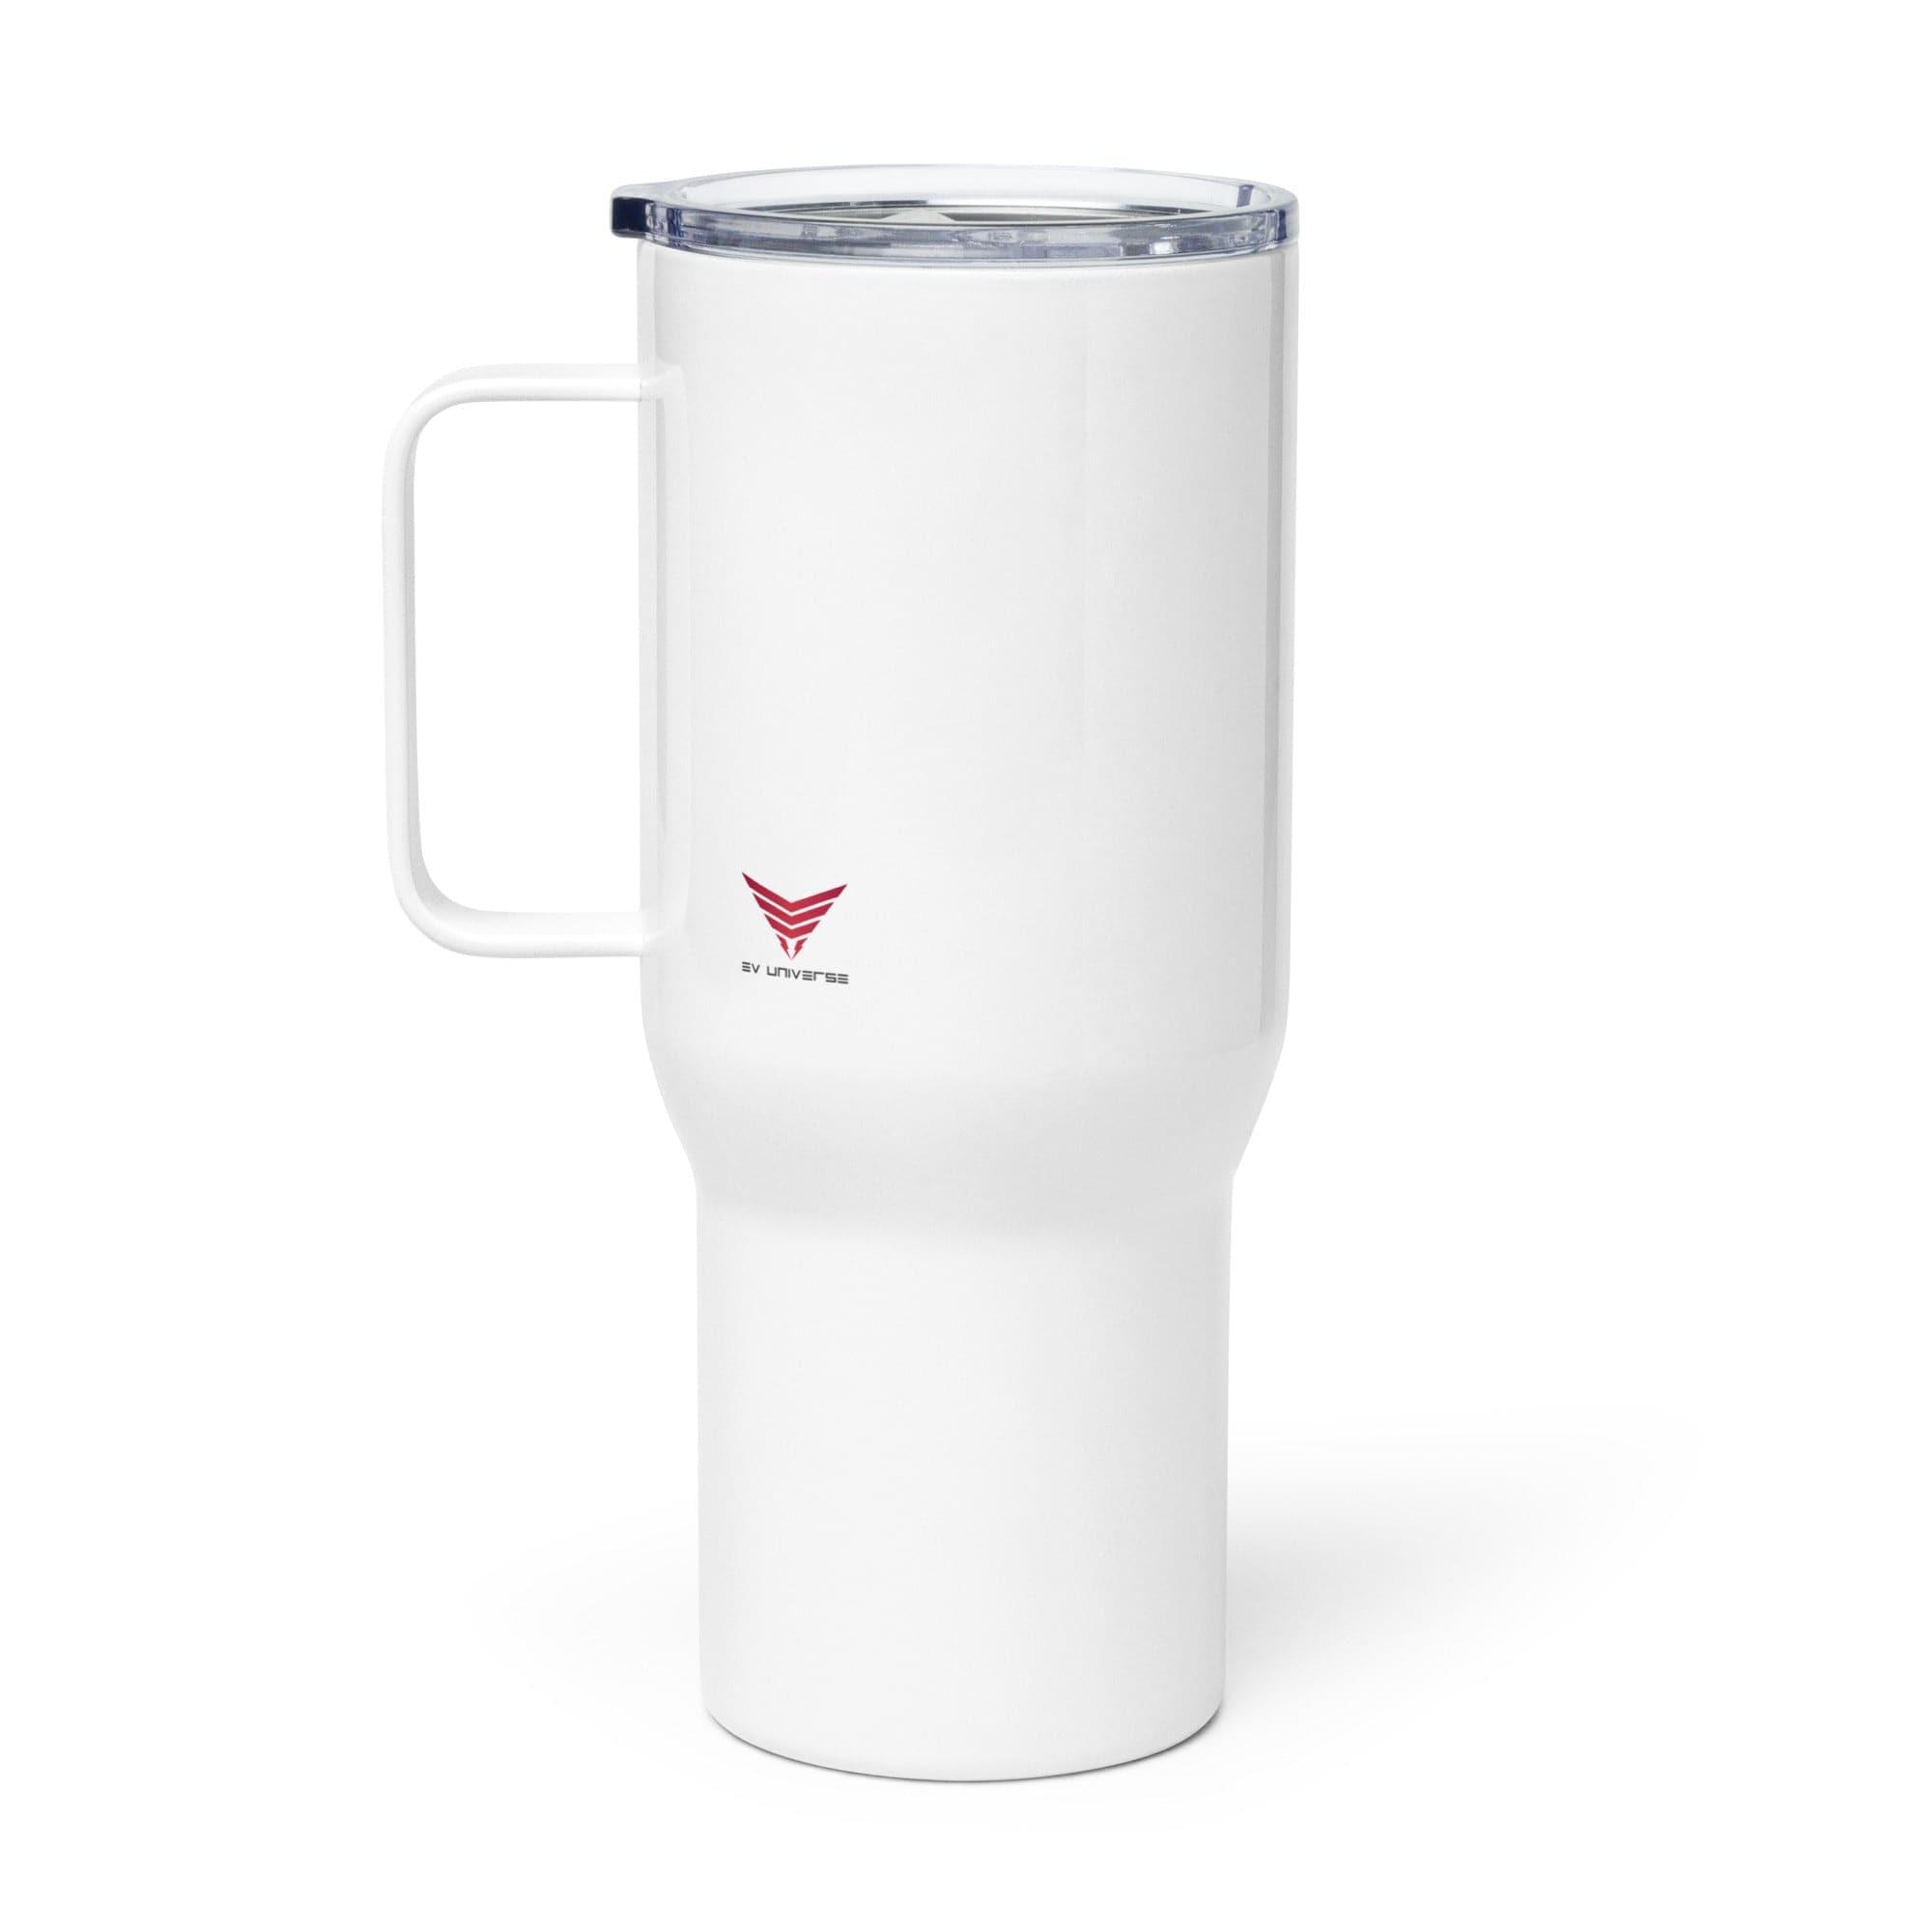 "Sipping on Eco-Consciousness" Travel Mug With a Handle - EV Universe Shop